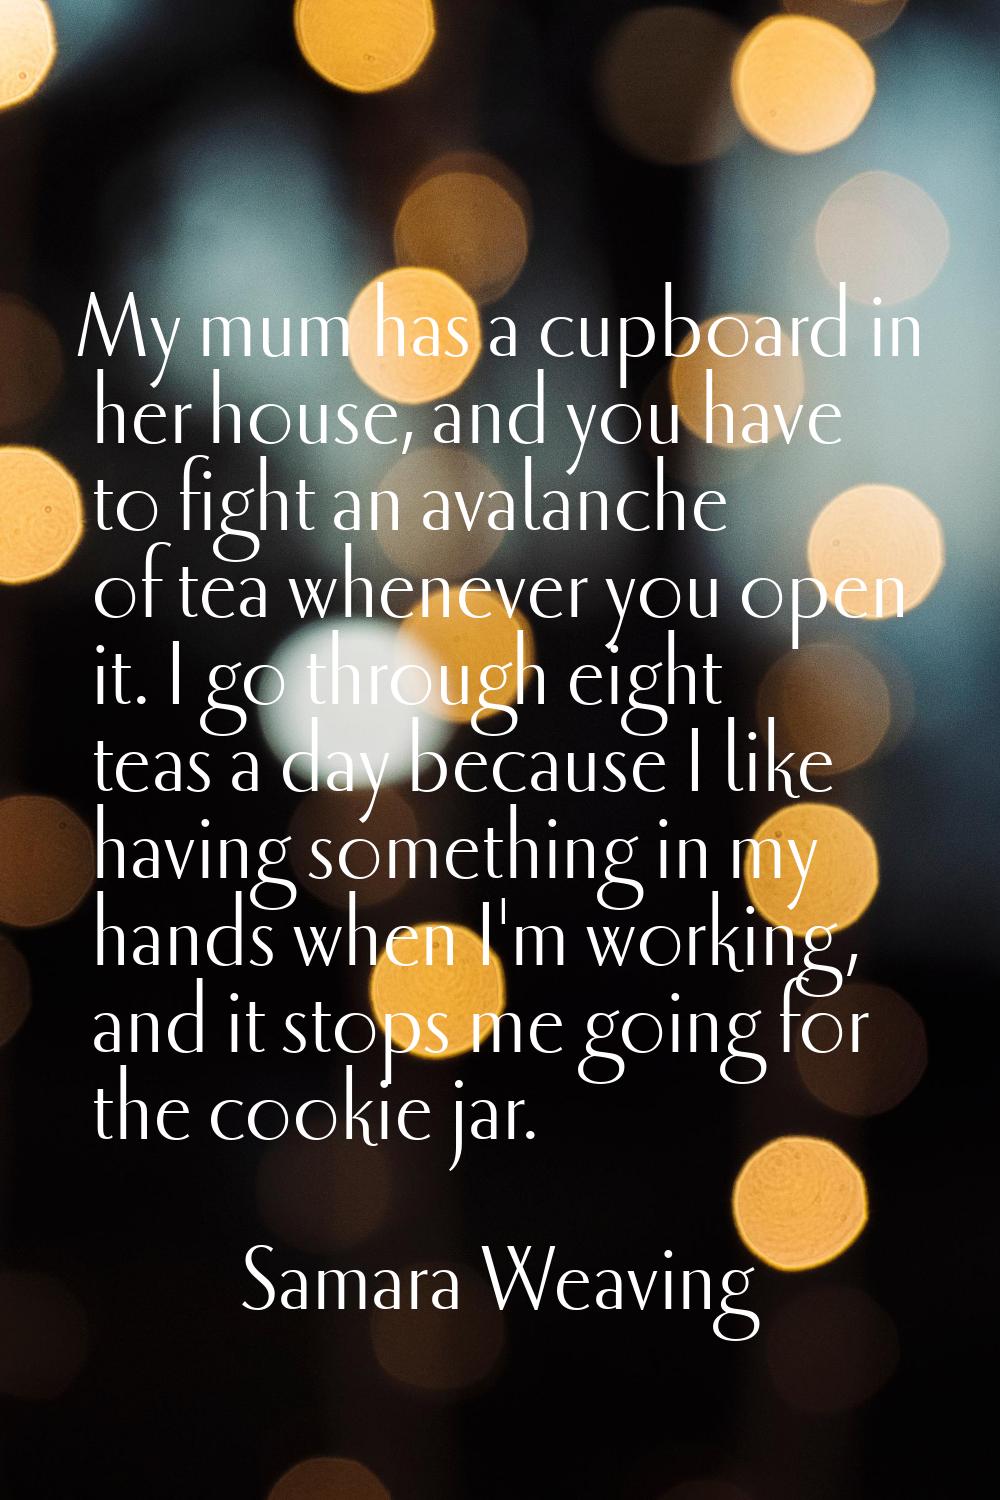 My mum has a cupboard in her house, and you have to fight an avalanche of tea whenever you open it.